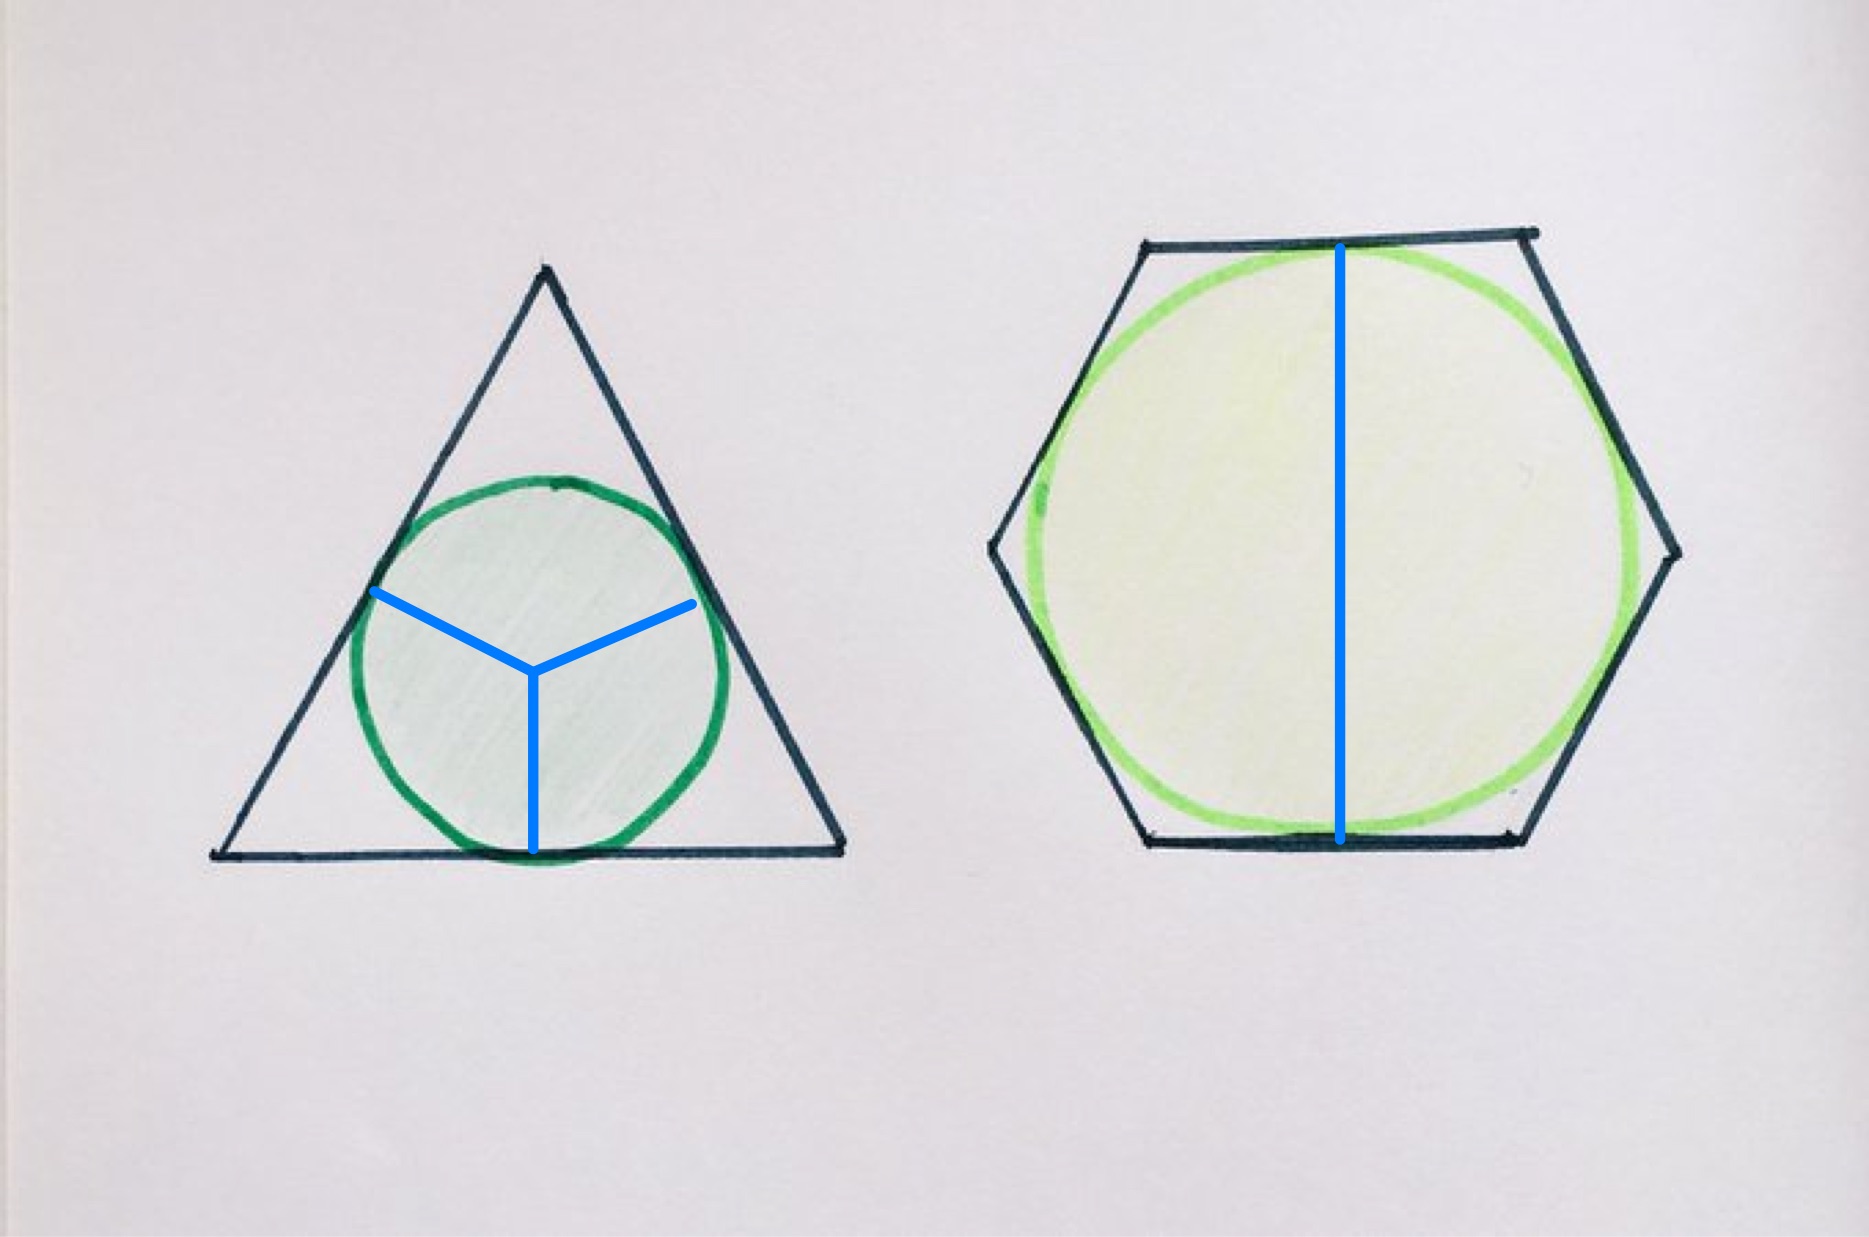 Polygons with equal perimeter labelled